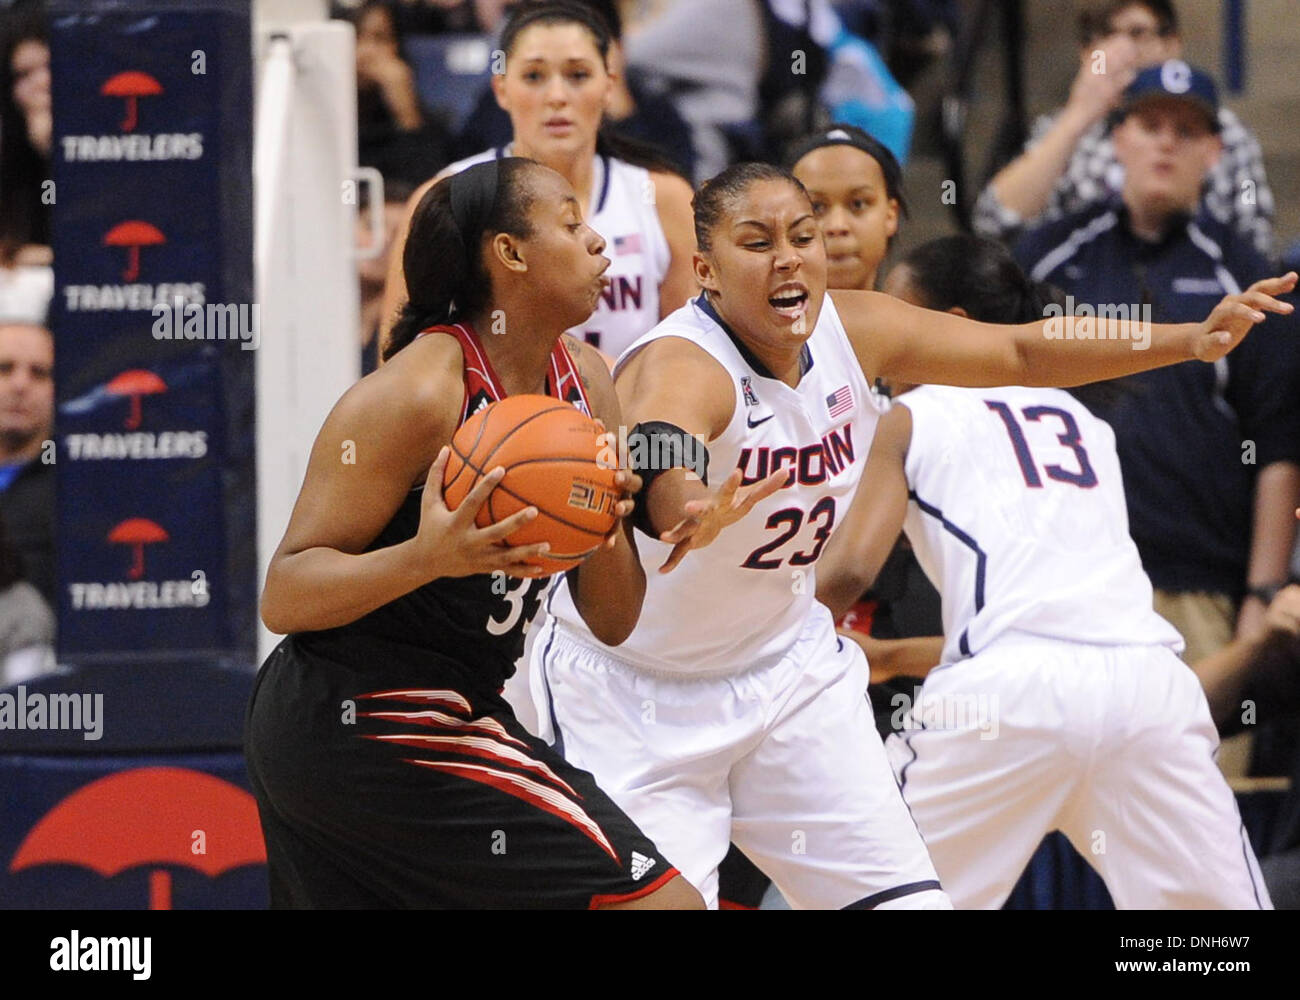 Storrs, CT, USA. 29th Dec, 2013. Sunday December 29, 2013: Cincinnati Bearcats forward Jeanise Randolph (33) gets to a loose ball in front of UConn huskies guard-forward Kaleena Mosqueda Lewis (23) during the 2nd half of the womens NCAA basketball game between Cincinnati and Connecticut at Gampel Pavilion in Storrs, CT. UConn beat Cincinnati easily 67-34.Bill Shettle / Cal Sport Media. © csm/Alamy Live News Stock Photo